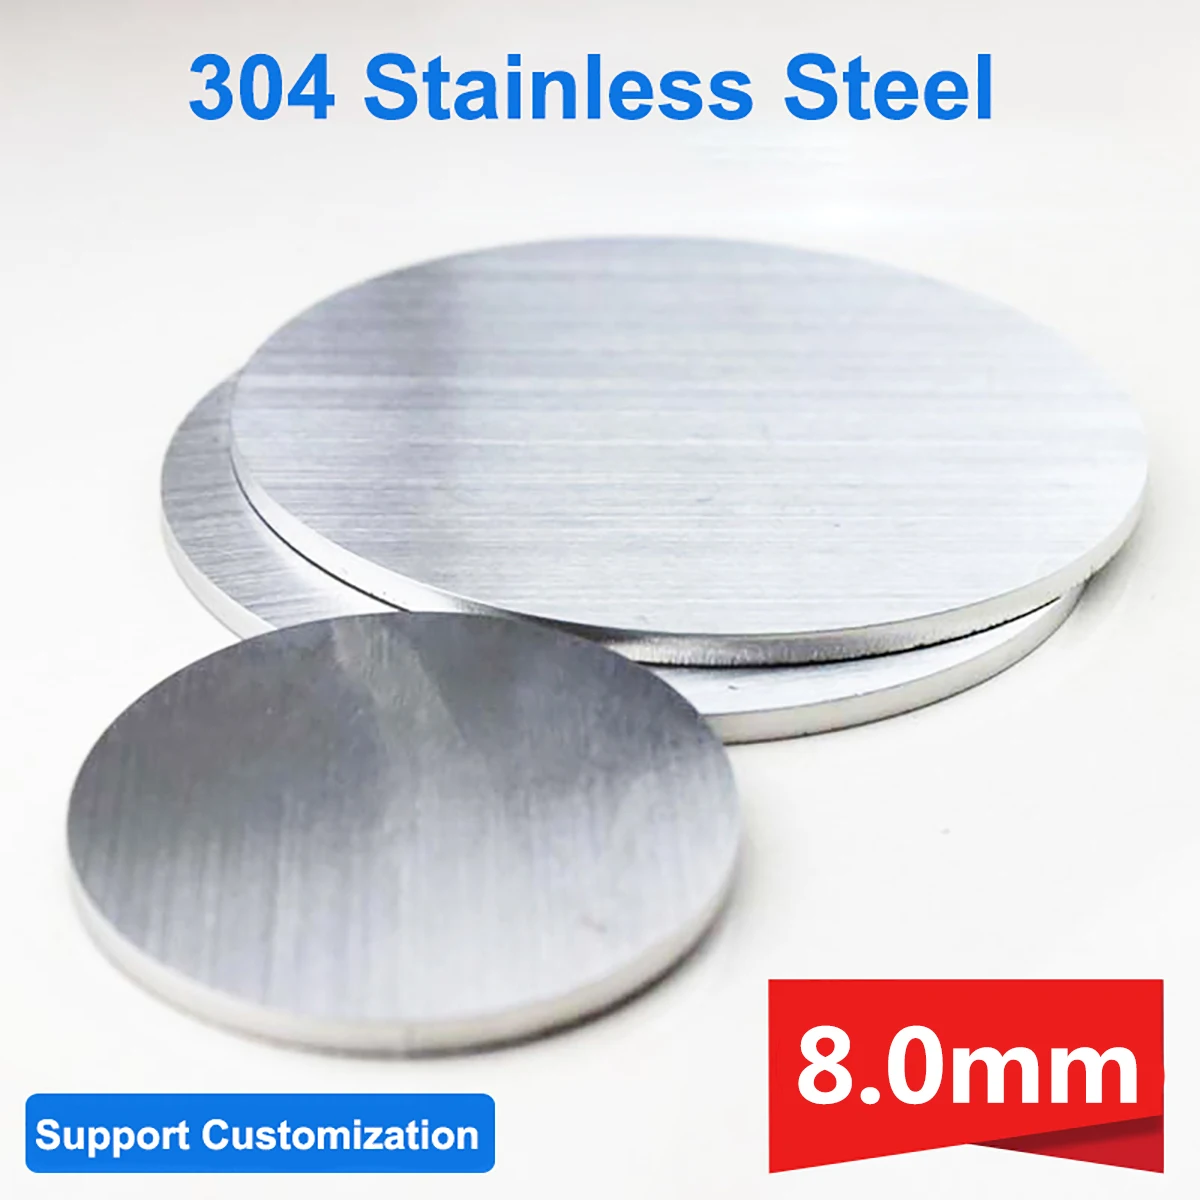 

1pcs Thickness 8mm Stainless Steel Round Plate Circular Sheet 304 Disc Round Disk Diameter 50mm - 200mm